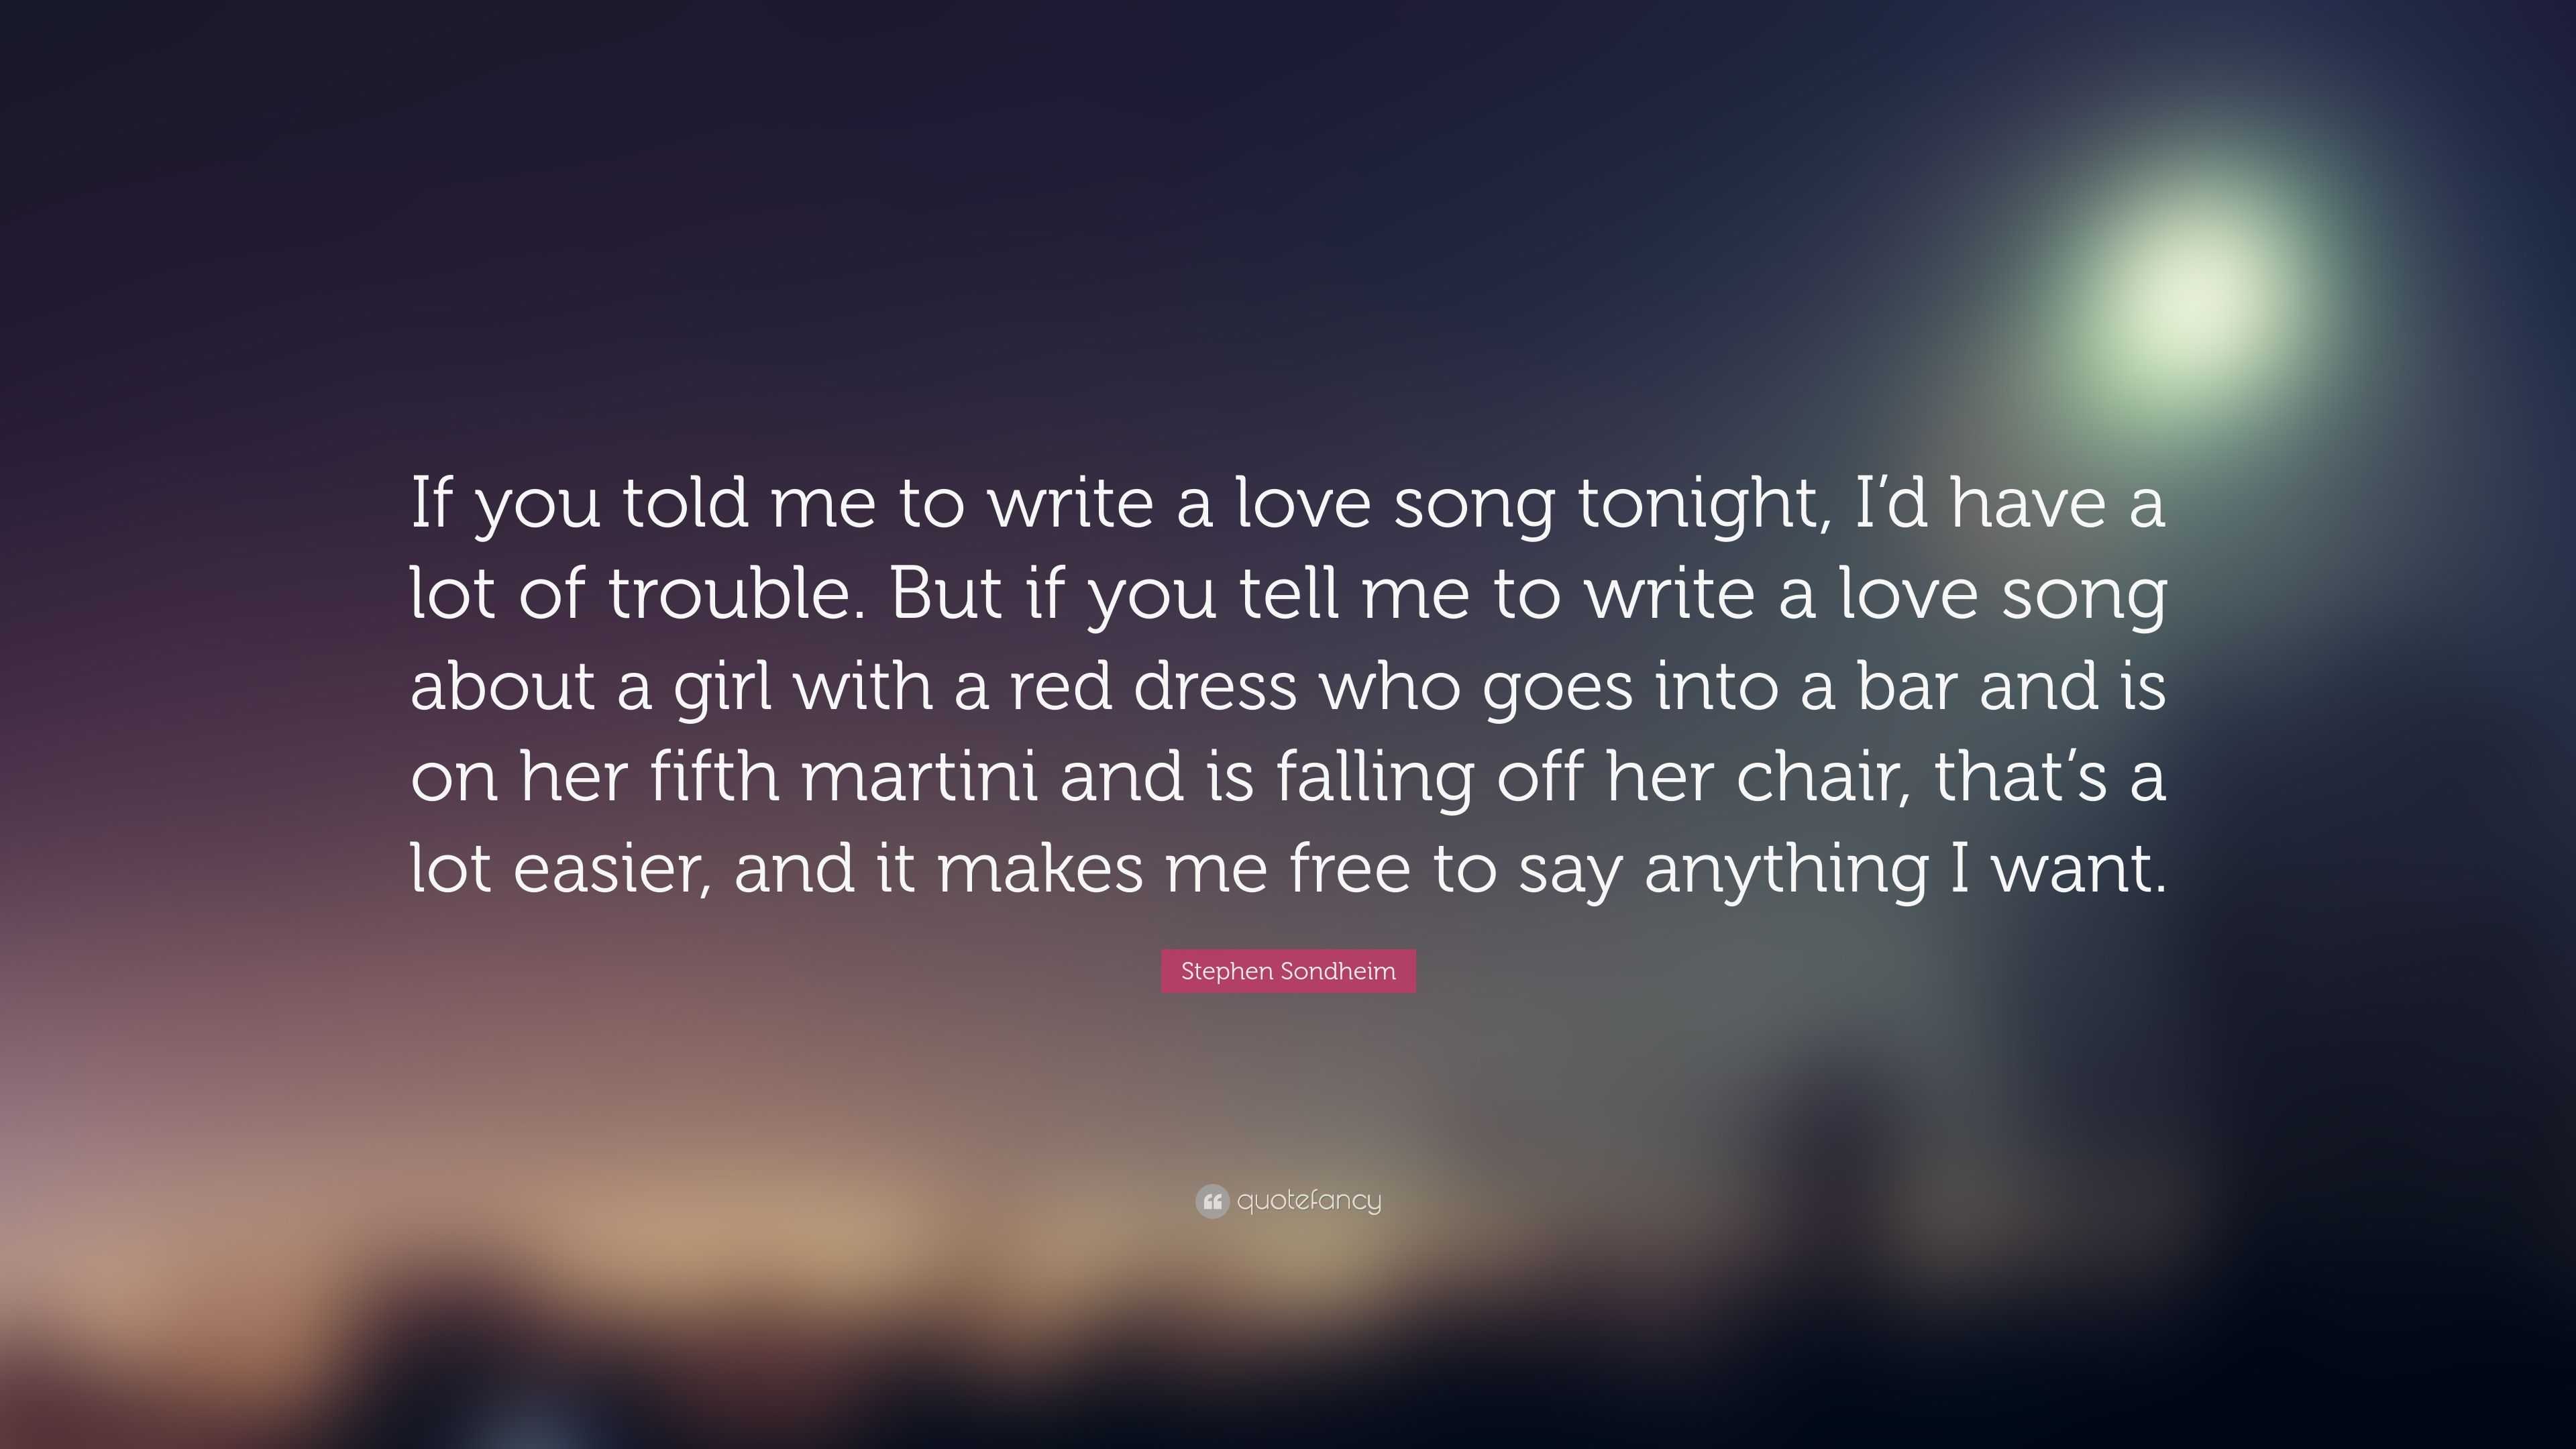 Stephen Sondheim Quote: “If you told me to write a love song